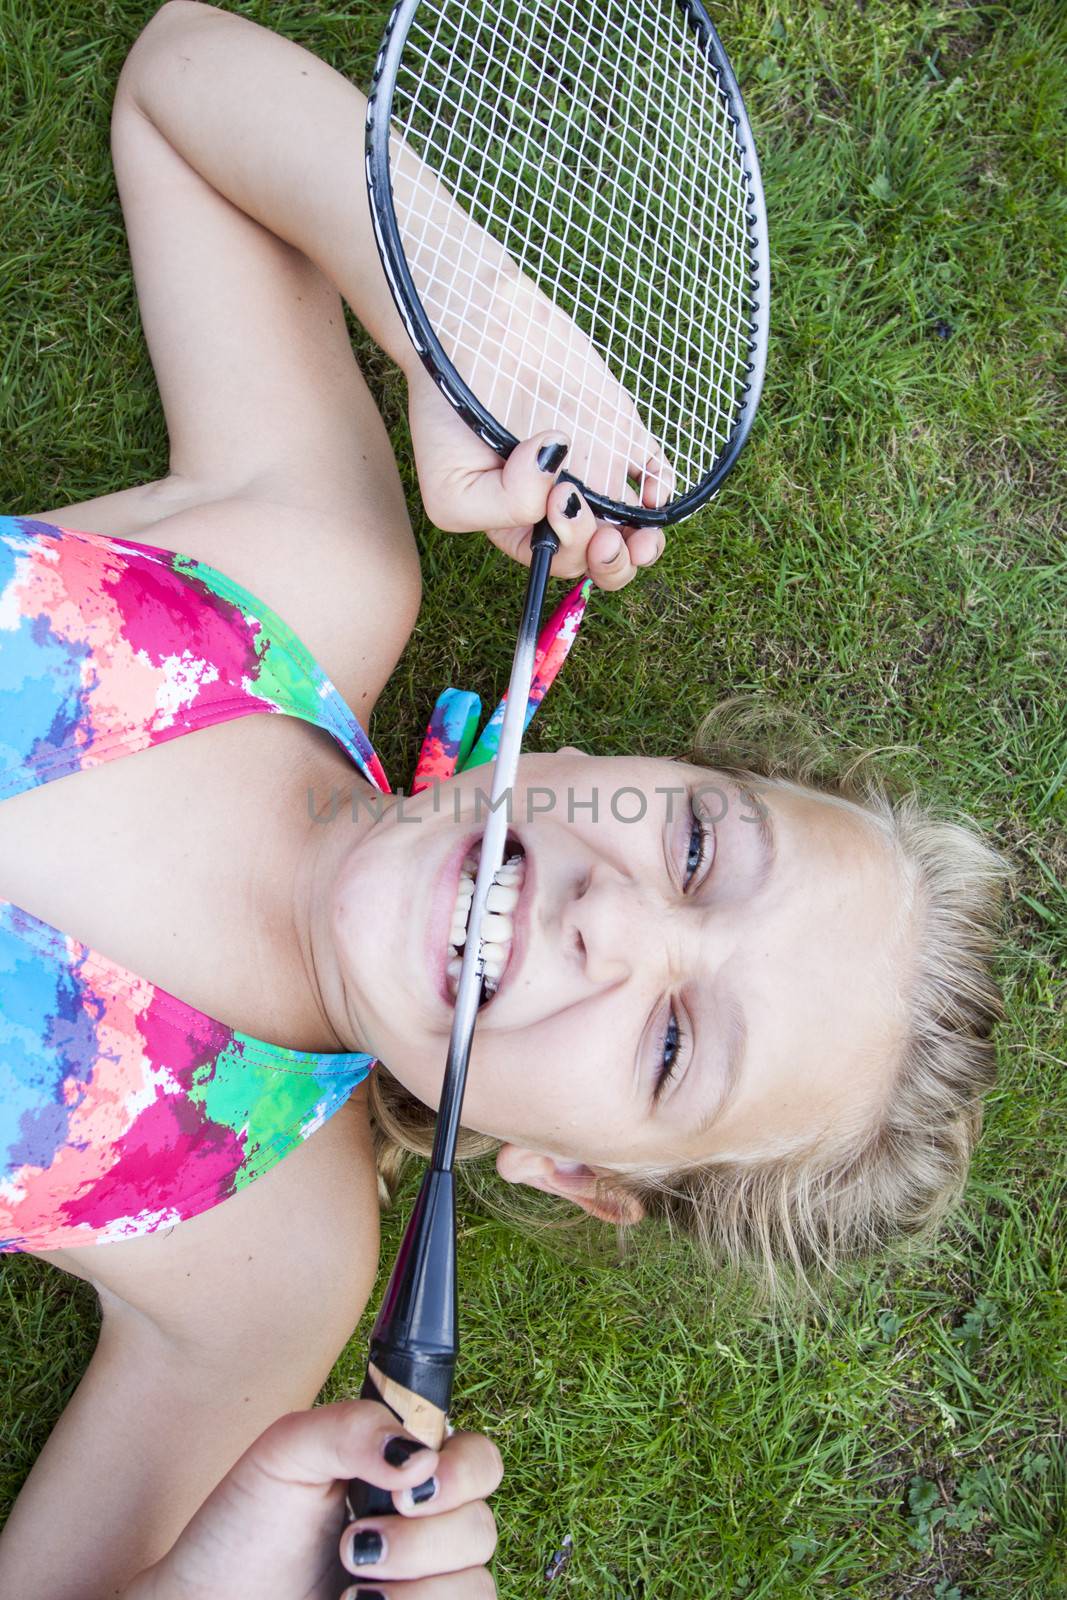 A teenage girl lying on the lawn outside, biting a badminton racket in frustration, doing a funny expression